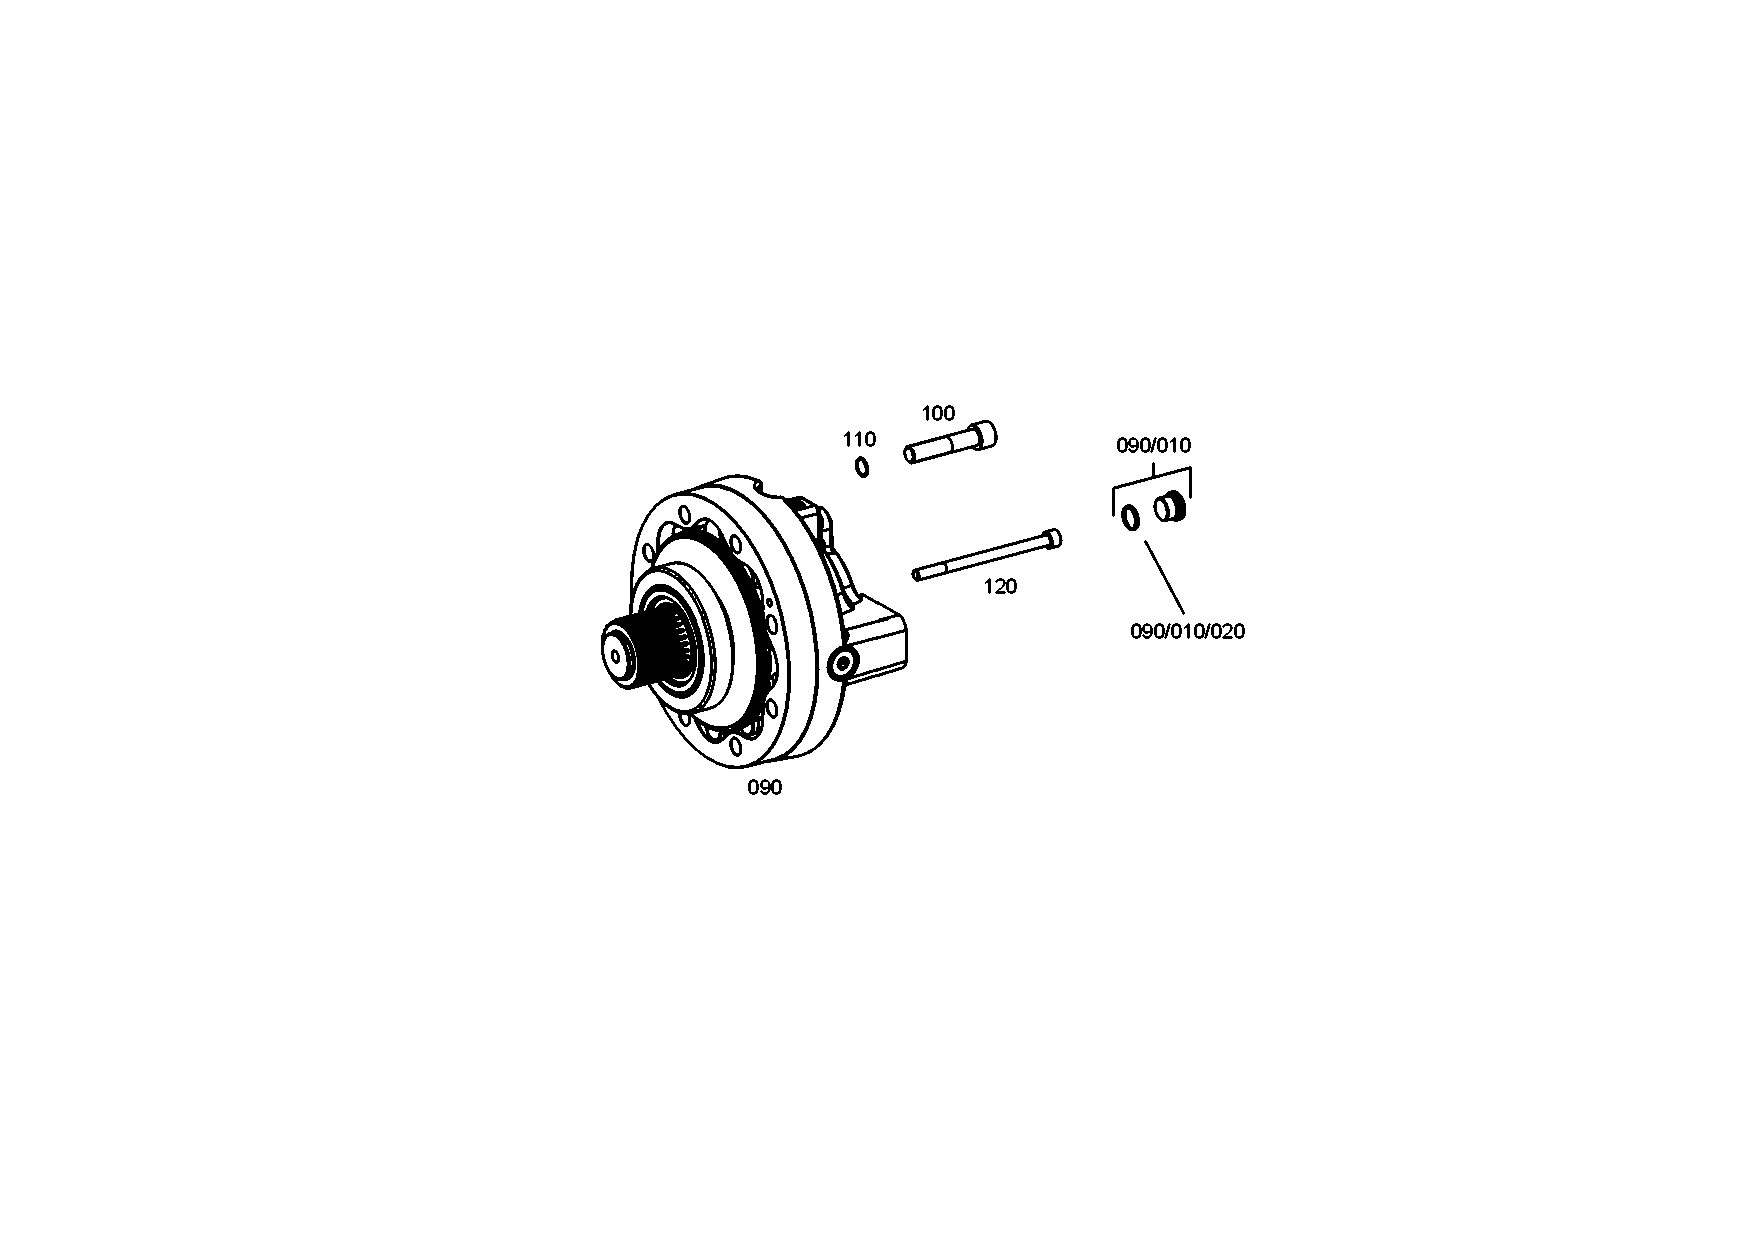 drawing for STETTER 98403032 - HYDRAULIC MOTOR (figure 1)